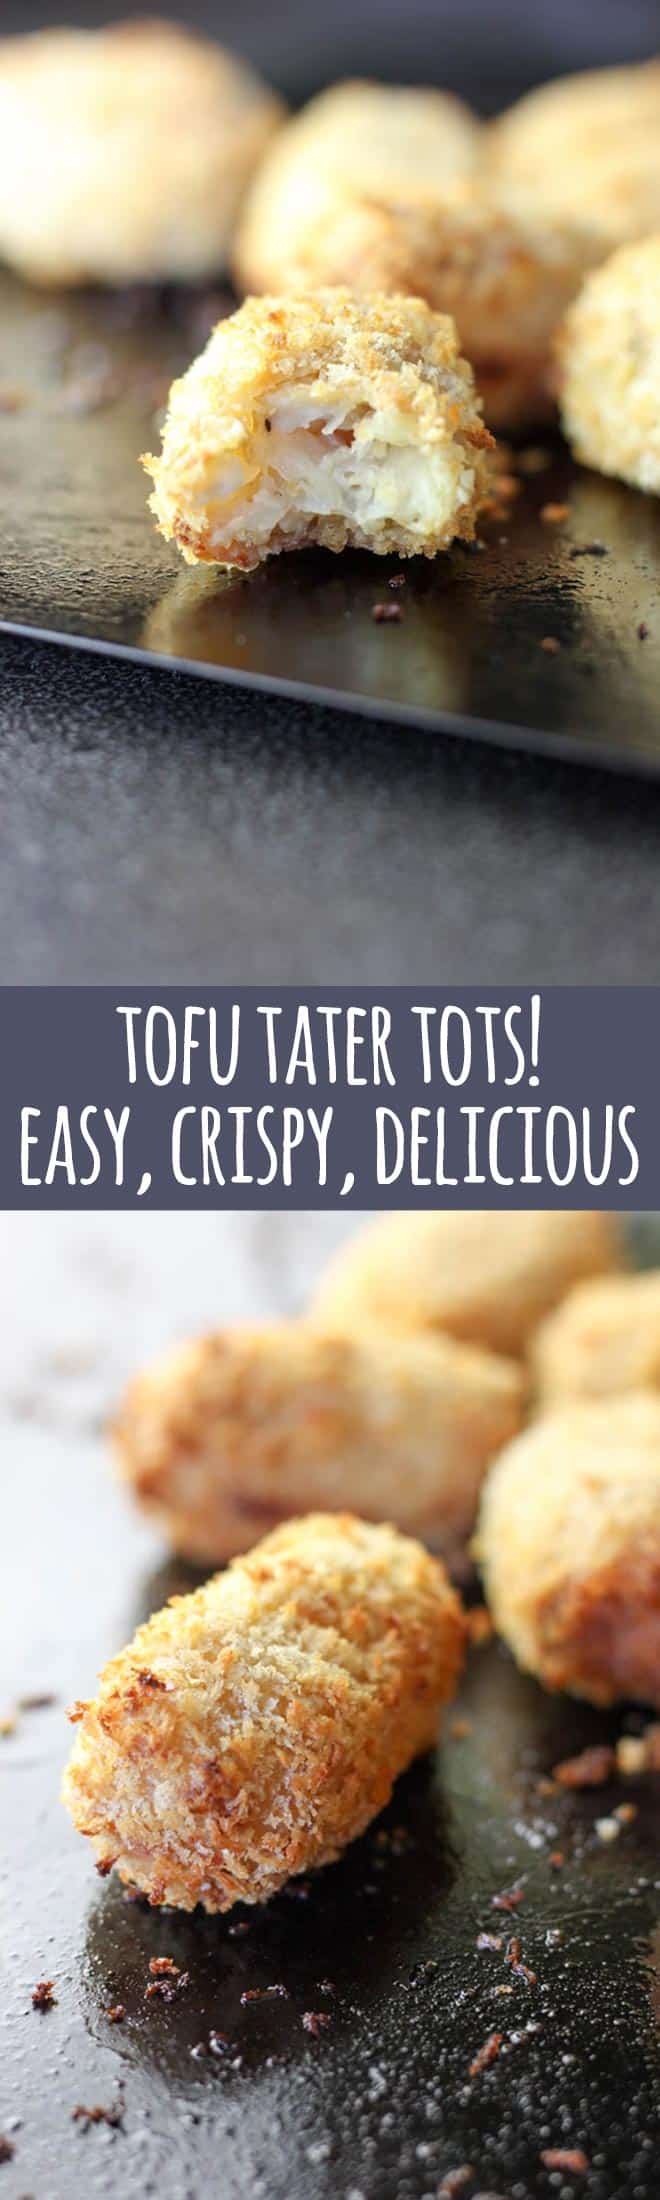 Tofu tater tots are easy to make, crispy and delicious, and a perfect kid-friendly vegan option. 